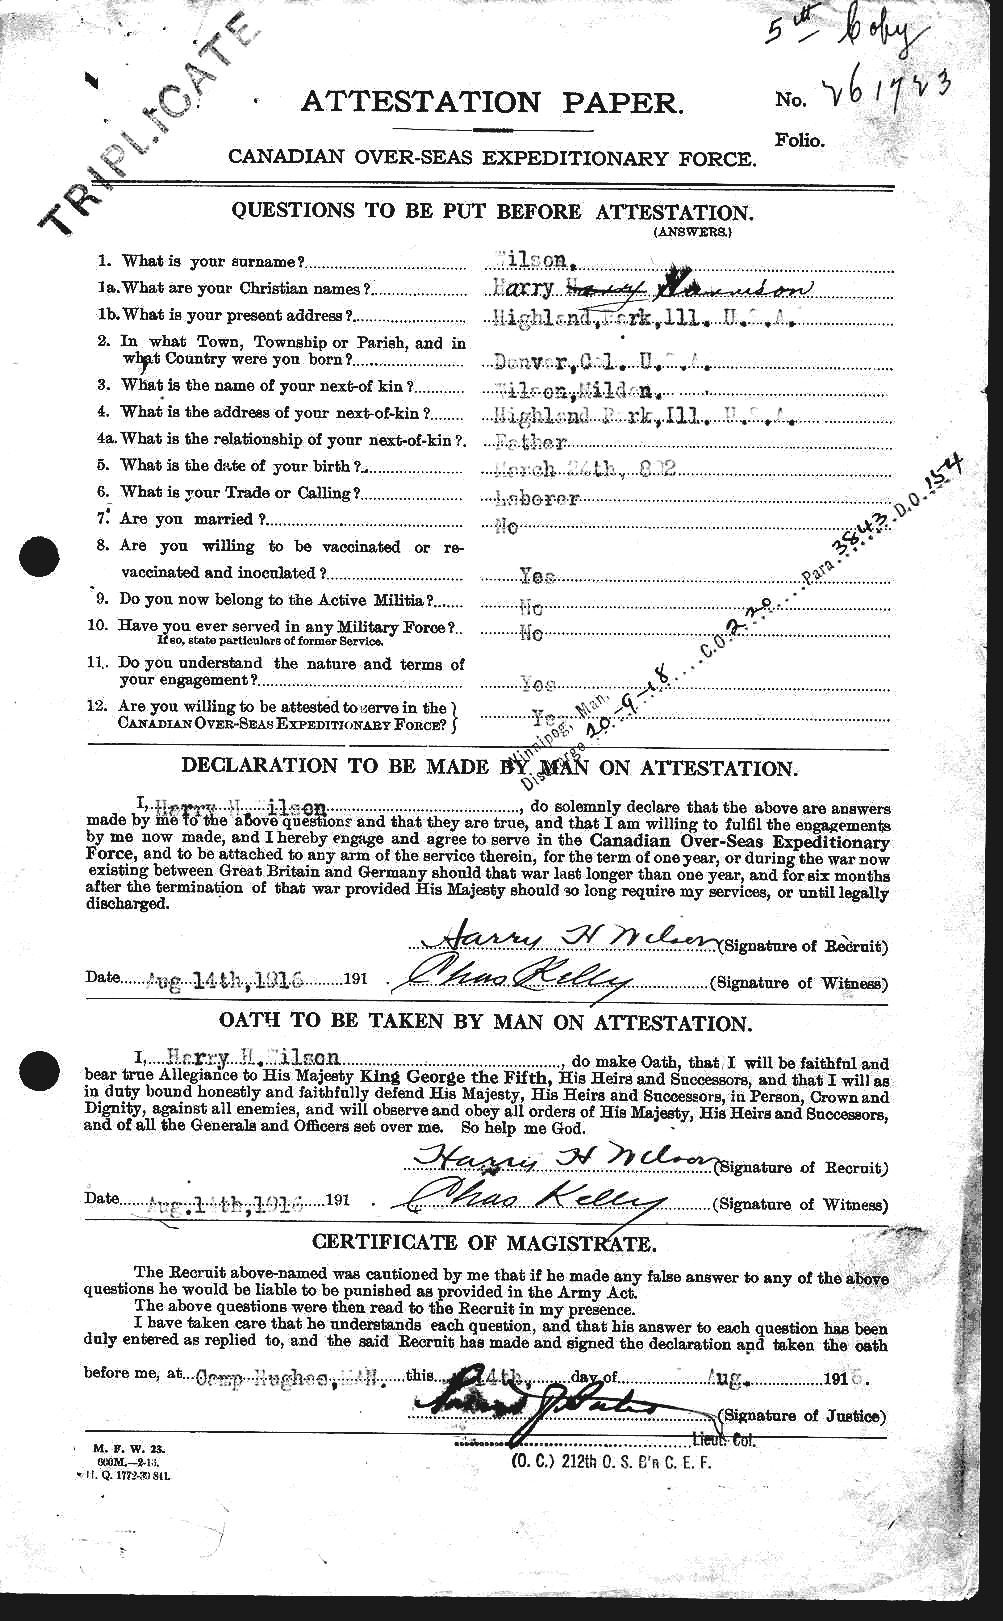 Personnel Records of the First World War - CEF 679463a